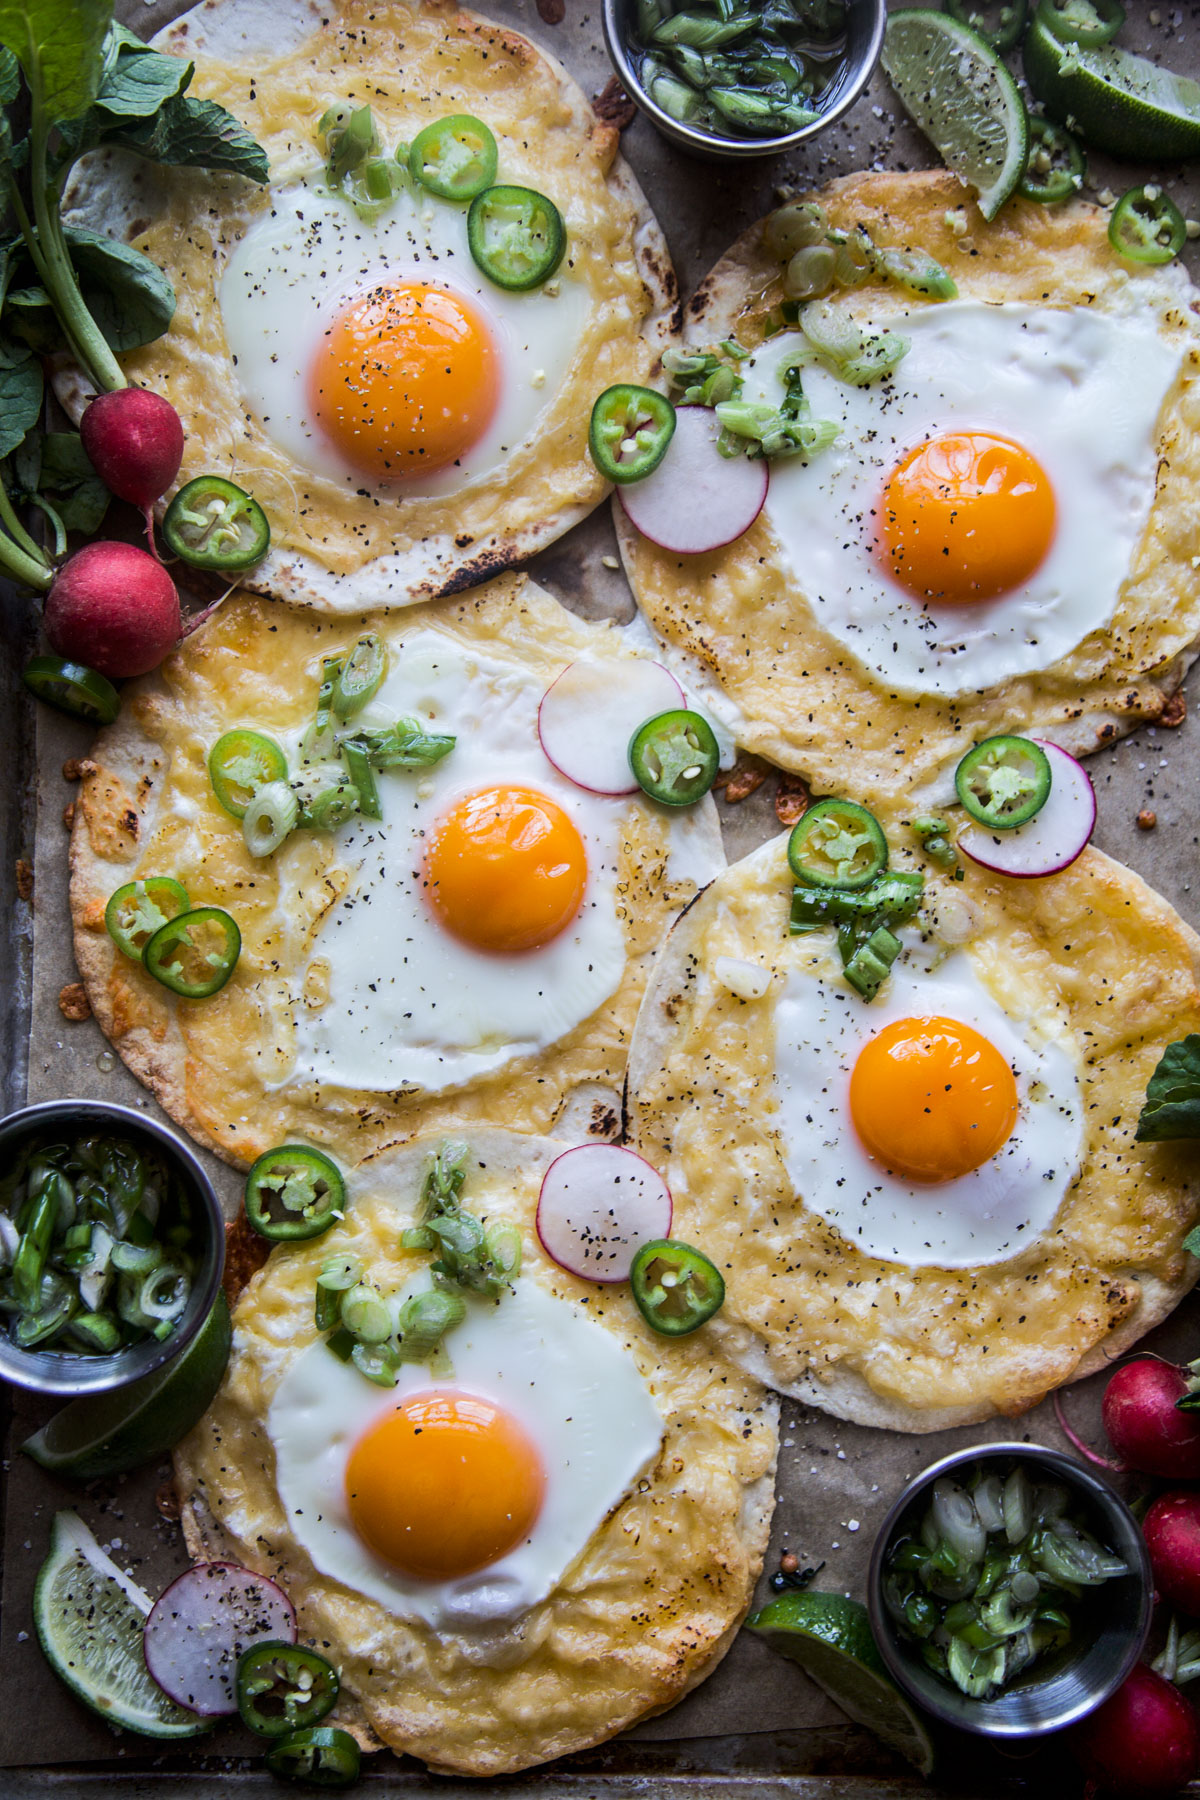 https://thecuriousplate.com/wp-content/uploads/2023/04/Sheet-Pan-Breakfast-Tacos-with-Scallion-Salsa-www.thecuriousplate.com1_.jpg